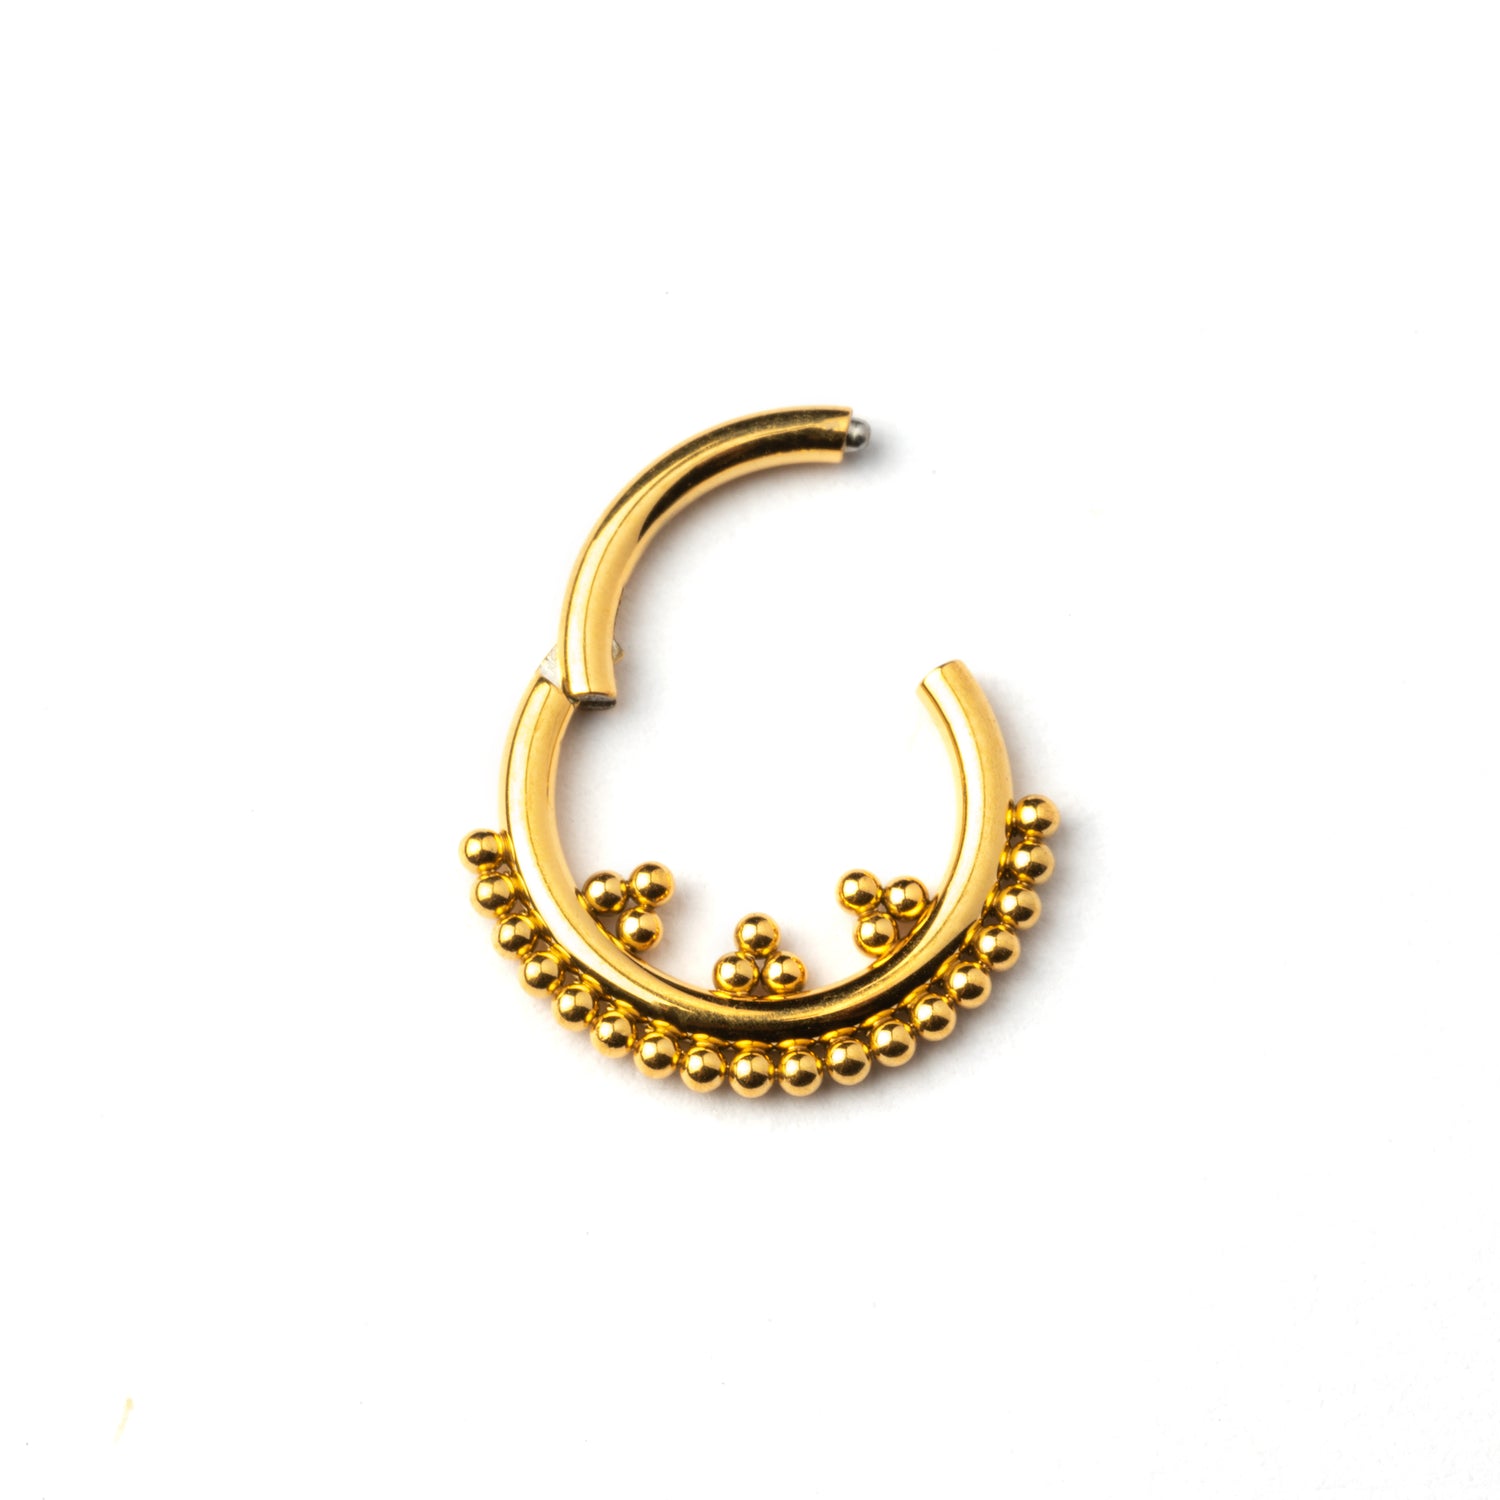 Gold Orbit surgical steel septum clicker with dots ornaments closure view